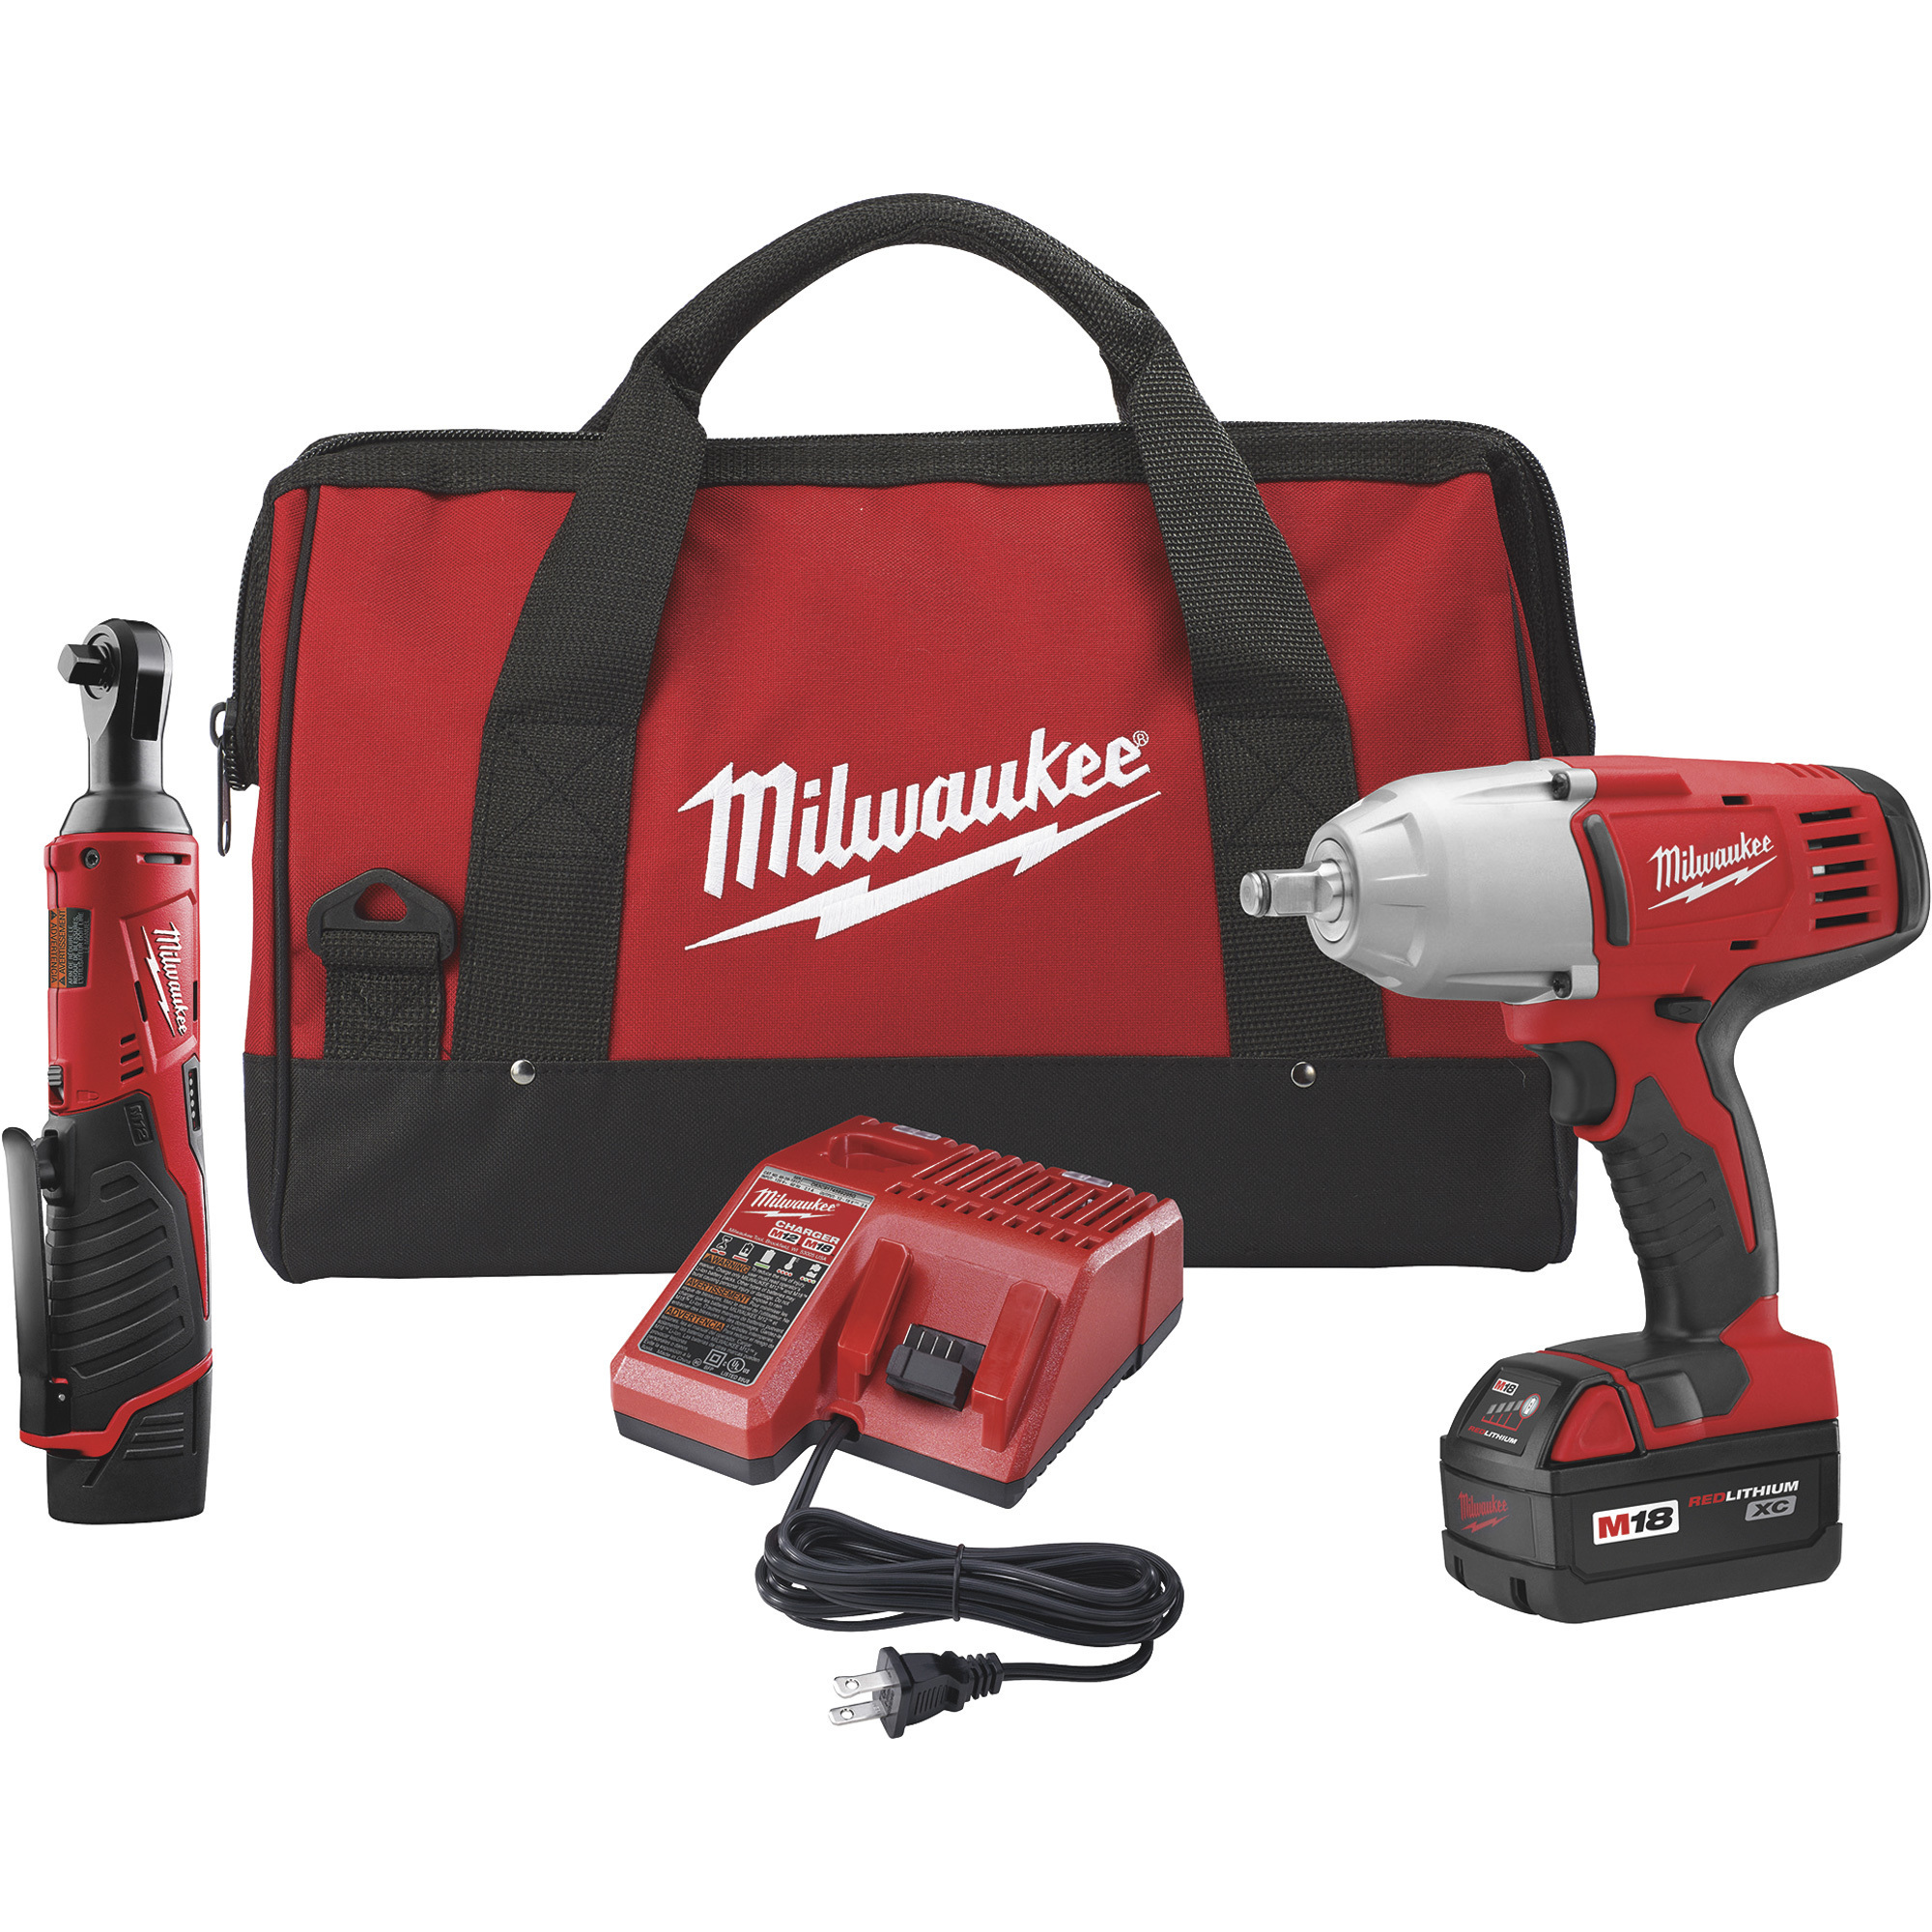 SPECIAL BUY! Milwaukee M18 Cordless 1/2in. High-Torque Impact Wrench  (2662-20) with FREE M12 3/8in. Ratchet (2457-20)! Northern Tool